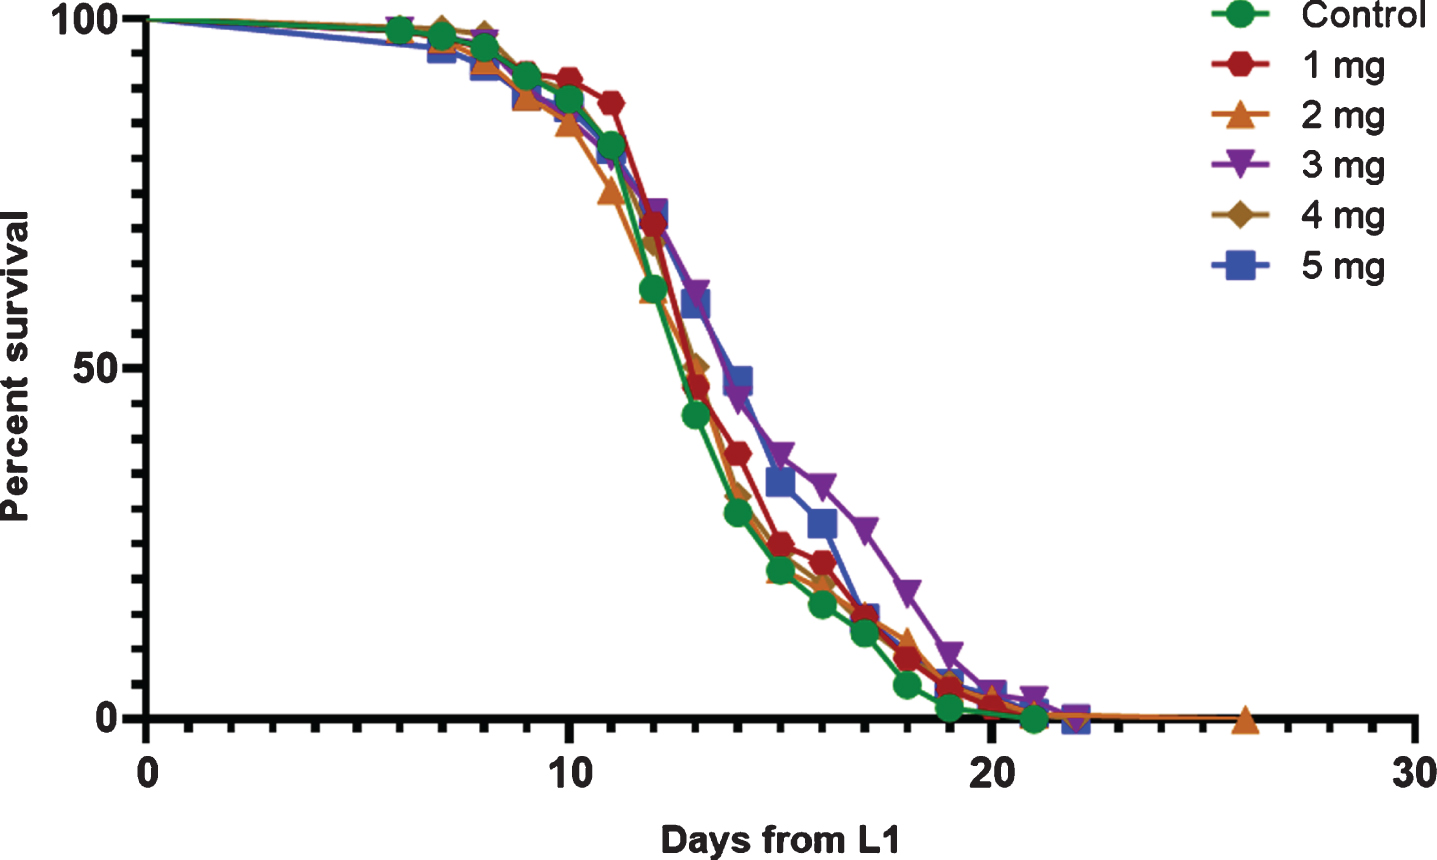 Survival curves for control and cocoa-supplemented wild type (N2) C. elegans. Experiments were performed in triplicate (n = 122 for control, n = 116 for 1 mg/ml, n = 135 for 2 mg/ml, n = 112 for 3 mg/ml, n = 135 for 4 mg/ml and n = 118 for 5 mg/ml). Differences between groups for mean and median lifespans were calculated using log rank (Mantel-Cox) test and maximum lifespan using one-way ANOVA (Tukey’s test). Cocoa supplementation at a dose of 3 mg/ ml and 5 mg/ml significantly increased both mean (P < 0.05, 8.3%and 5.9%) and median (P < 0.05, 7.8%) lifespan. Cocoa at 4mg/ml dose also significantly increased the median lifespan (P < 0.05, 7.8%). However, maximum lifespan was not affected by any cocoa dose.